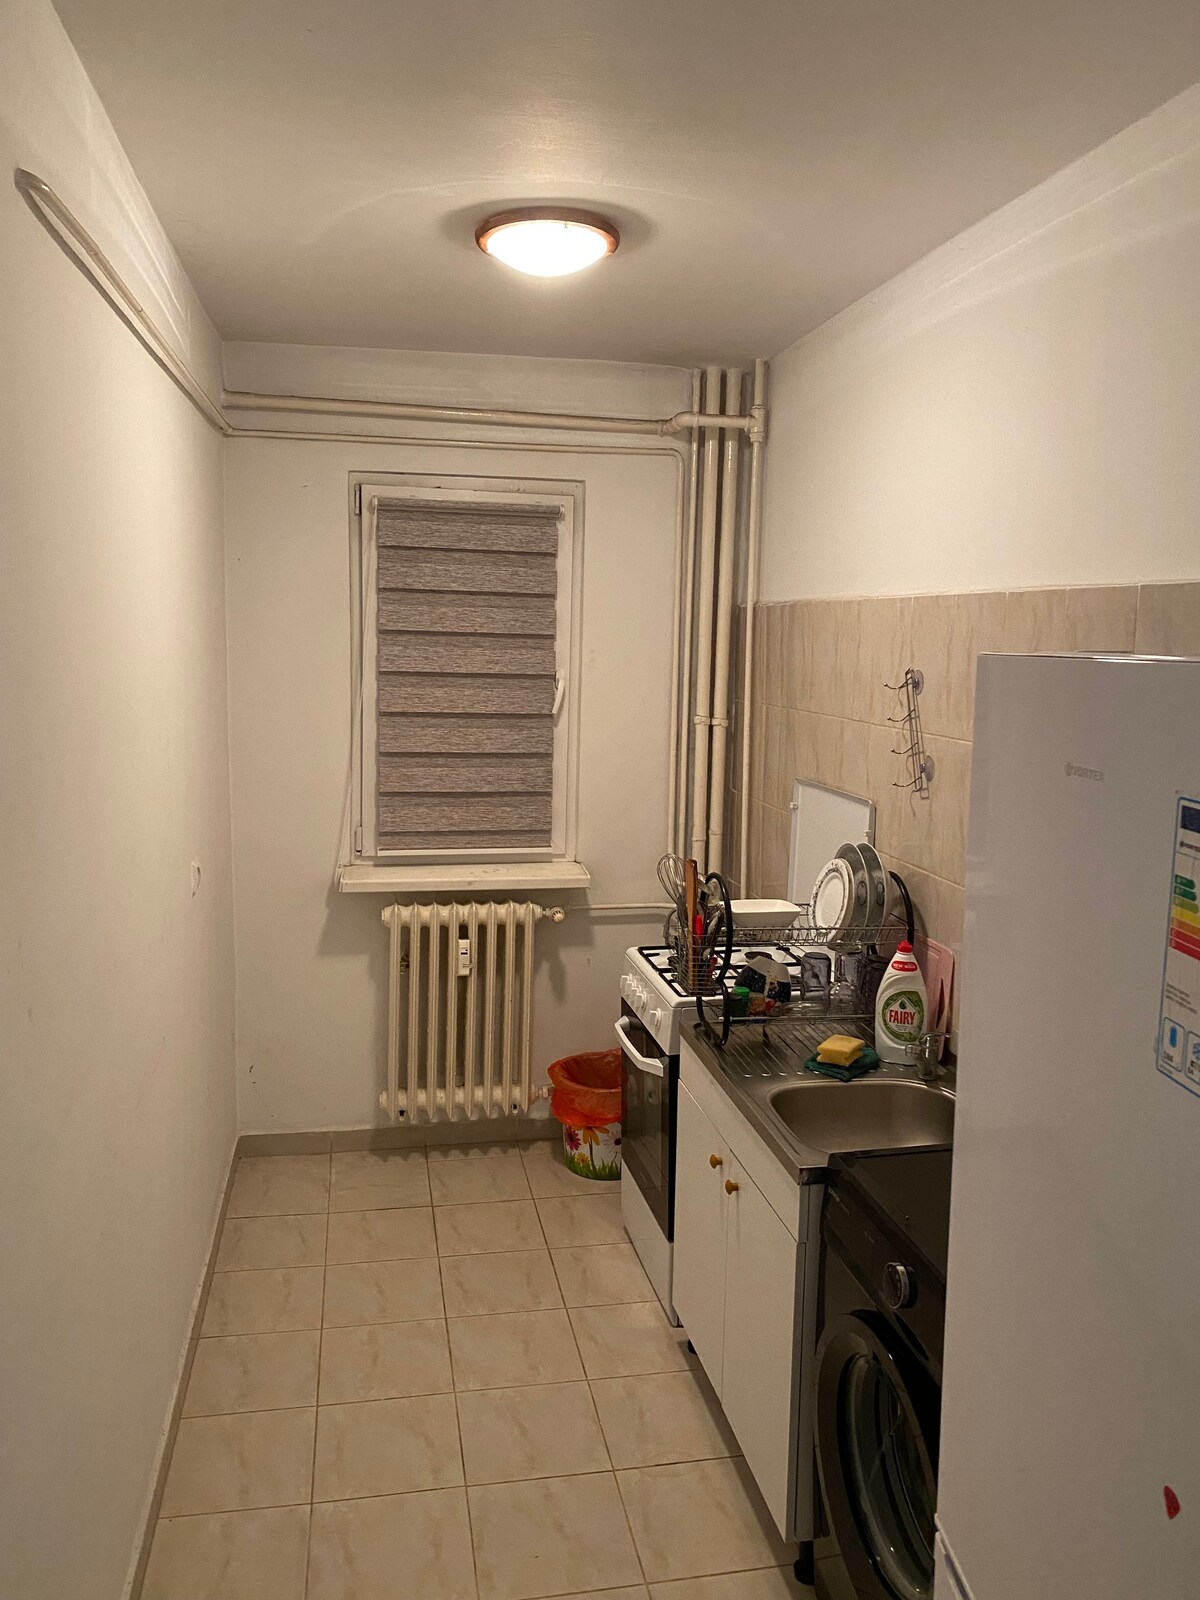 Lovely 1 bedroom apartment next to the mall